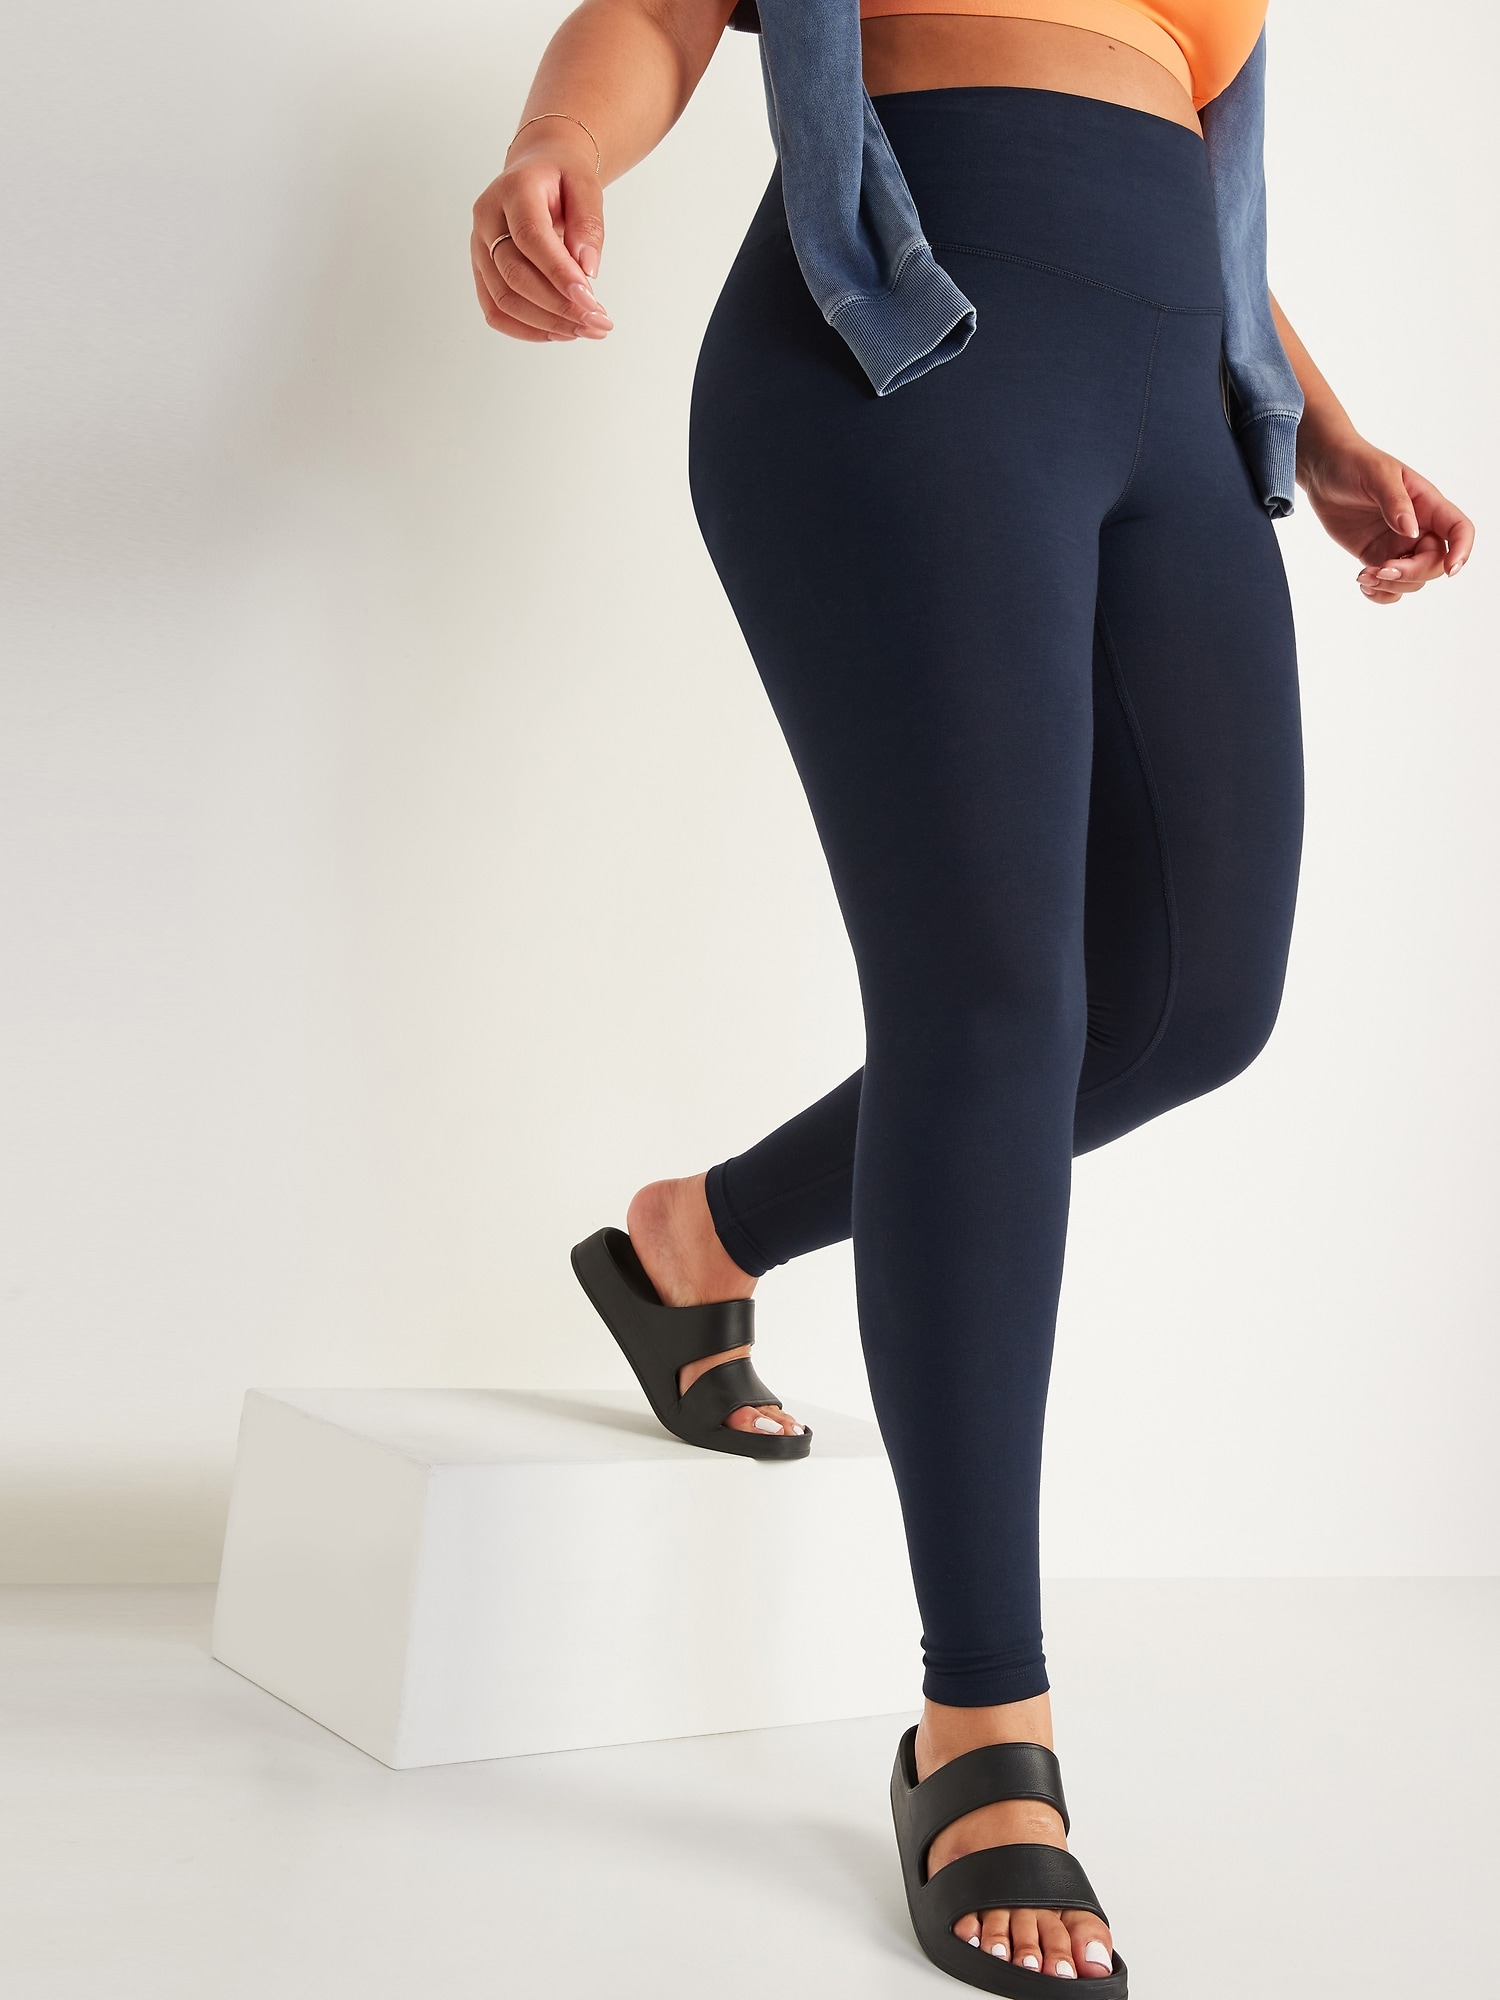 Gerrycan Blue and Navy Full Length Compression Activewear Leggings